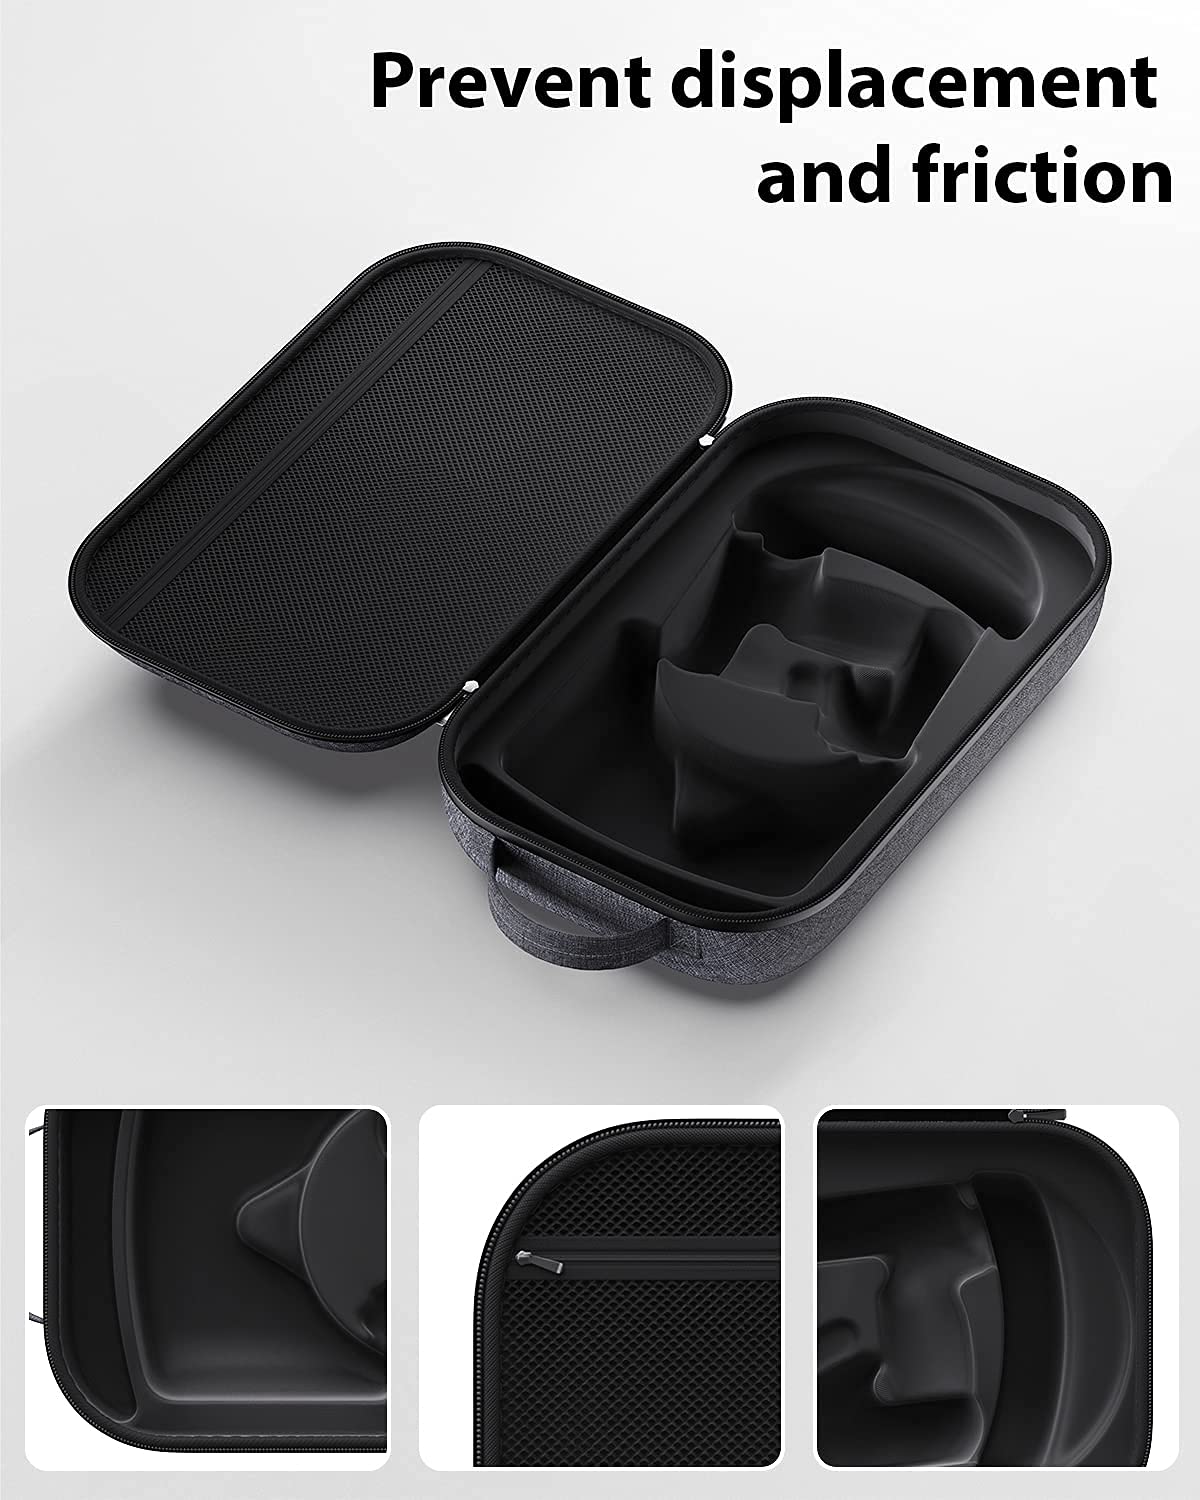 Amavasion Hard Carrying Case Compatible with Meta Quest Pro/Oculus Quest 2 Accessories VR Headset with Elite Strap, Touch Controllers and Other Accessories, Ultra-Sleek Design for Travel and Storage